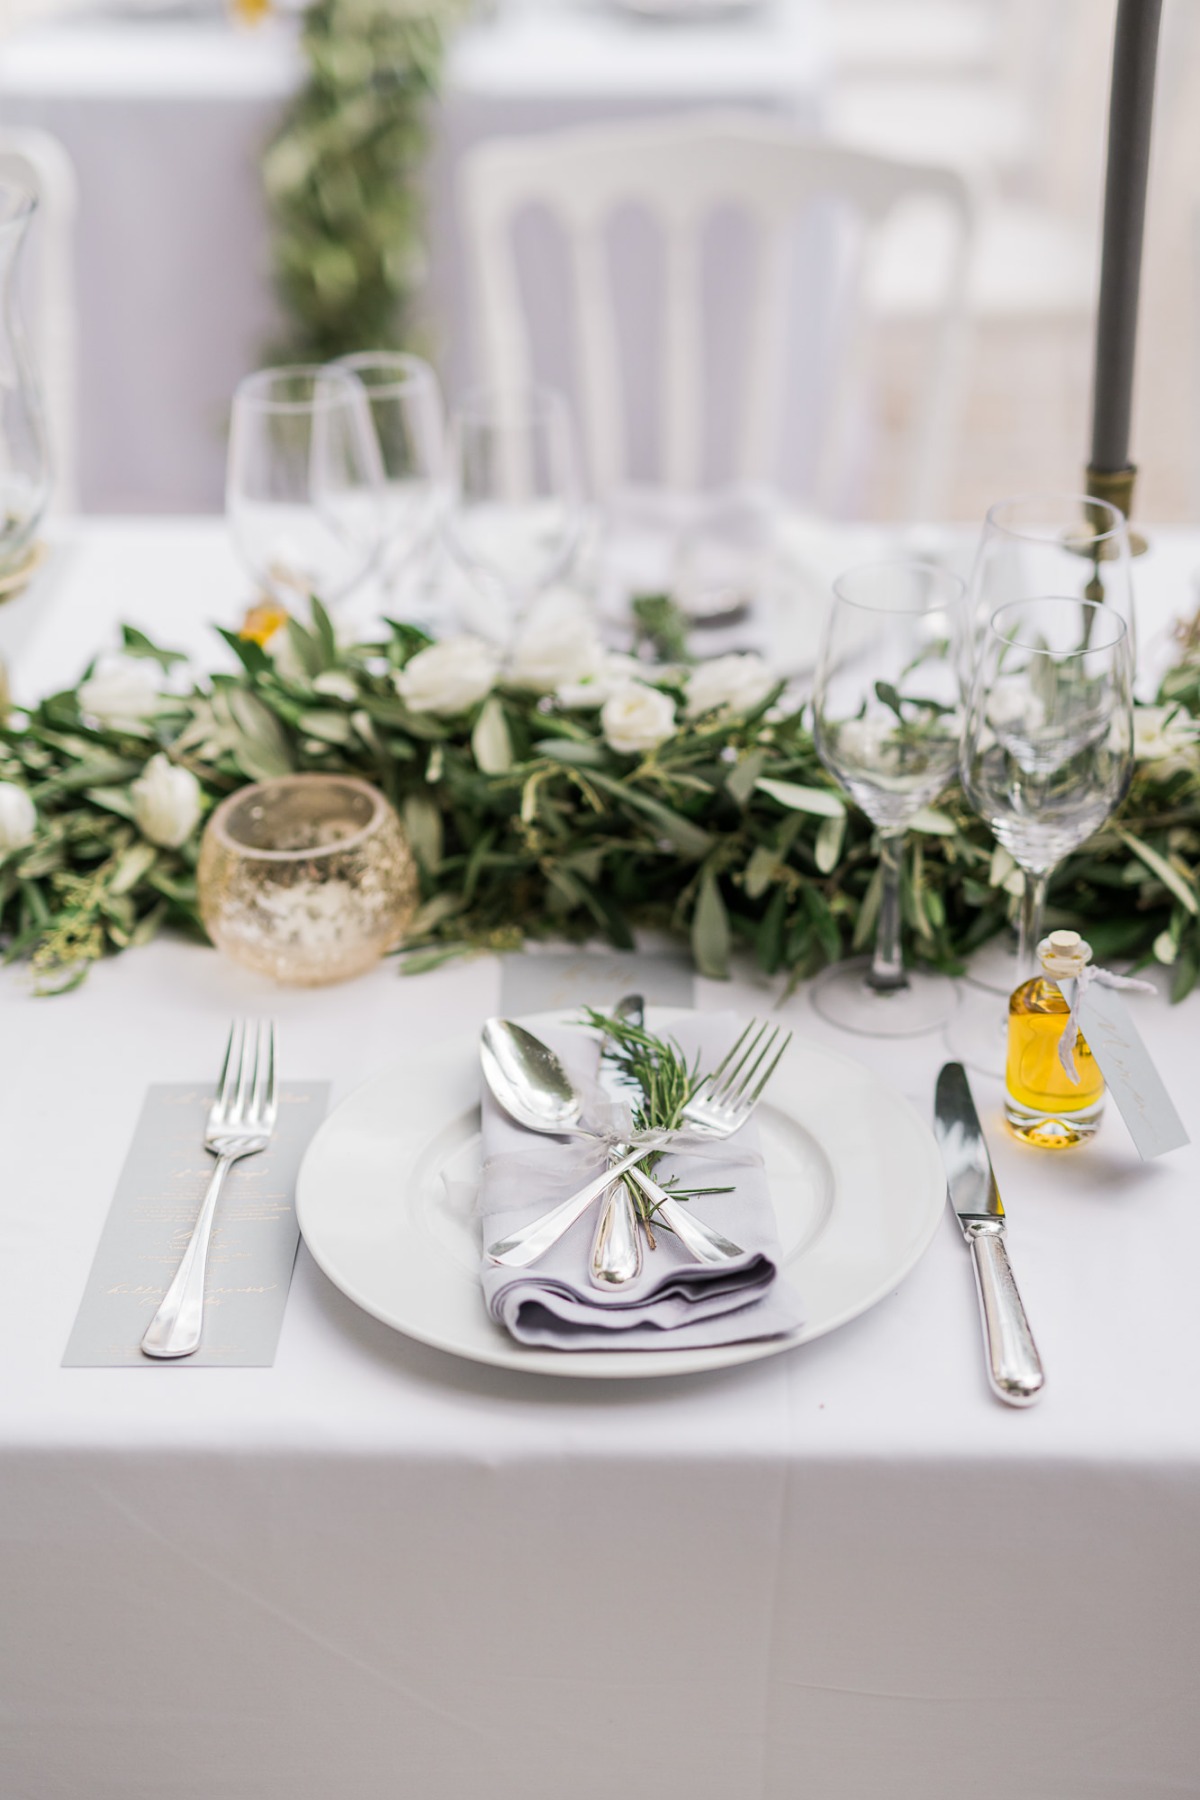 Add lots of greenery to your reception table